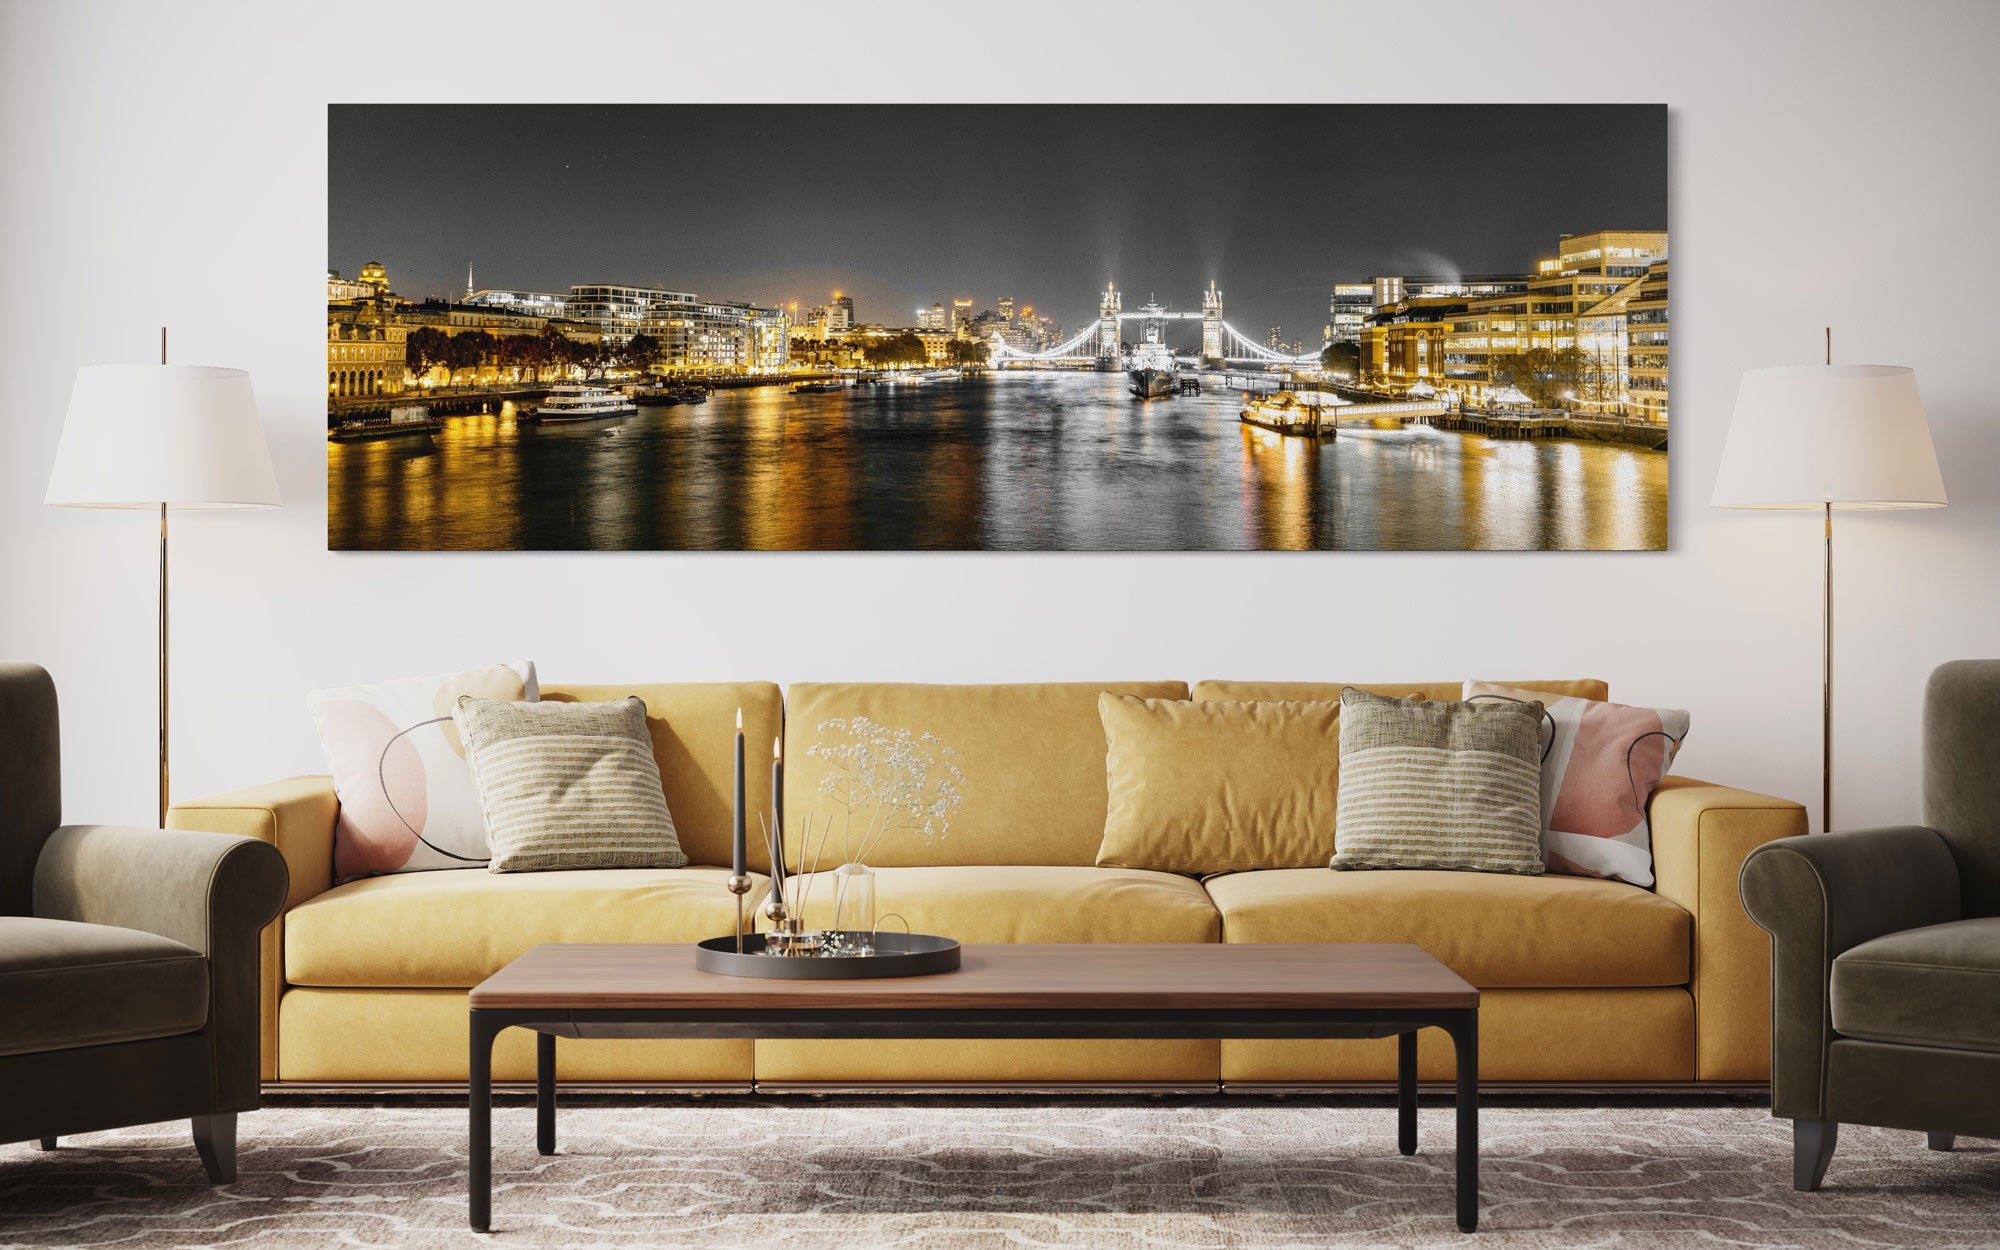 Large Canvas Prints: Inspiring Ideas to Elevate Your Space